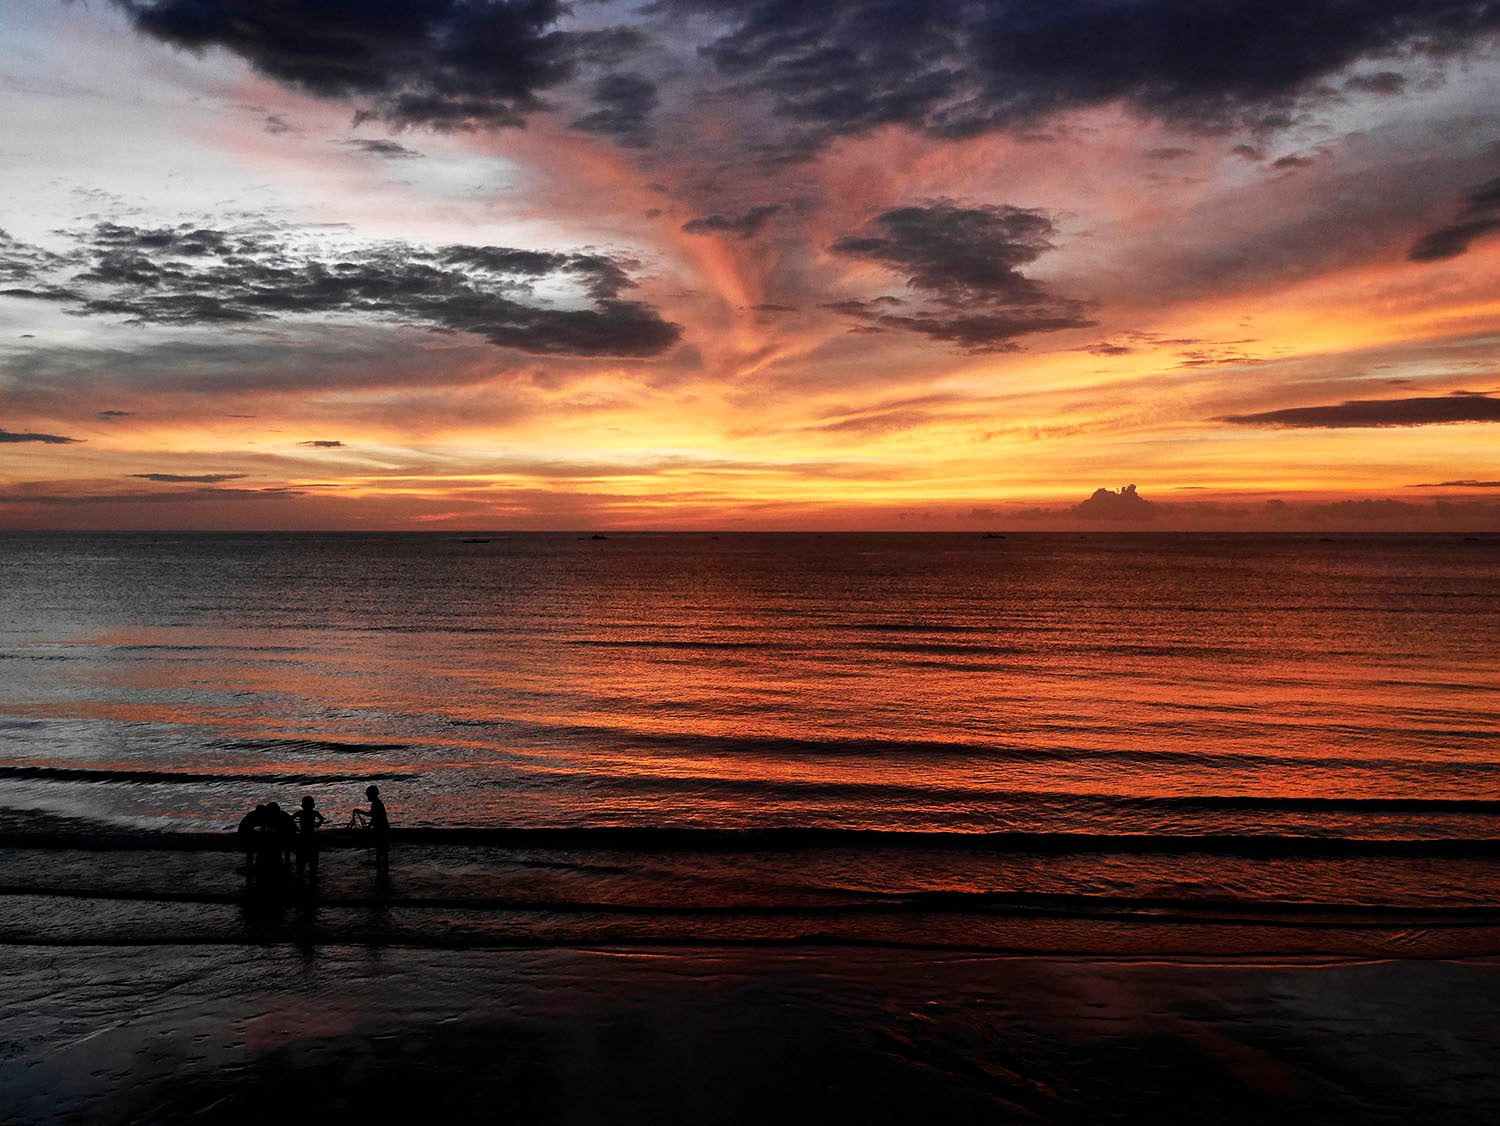 SIT STILL. The sunset in Dipolog, a city in Zamboanga del Norte, something to look forward to.  